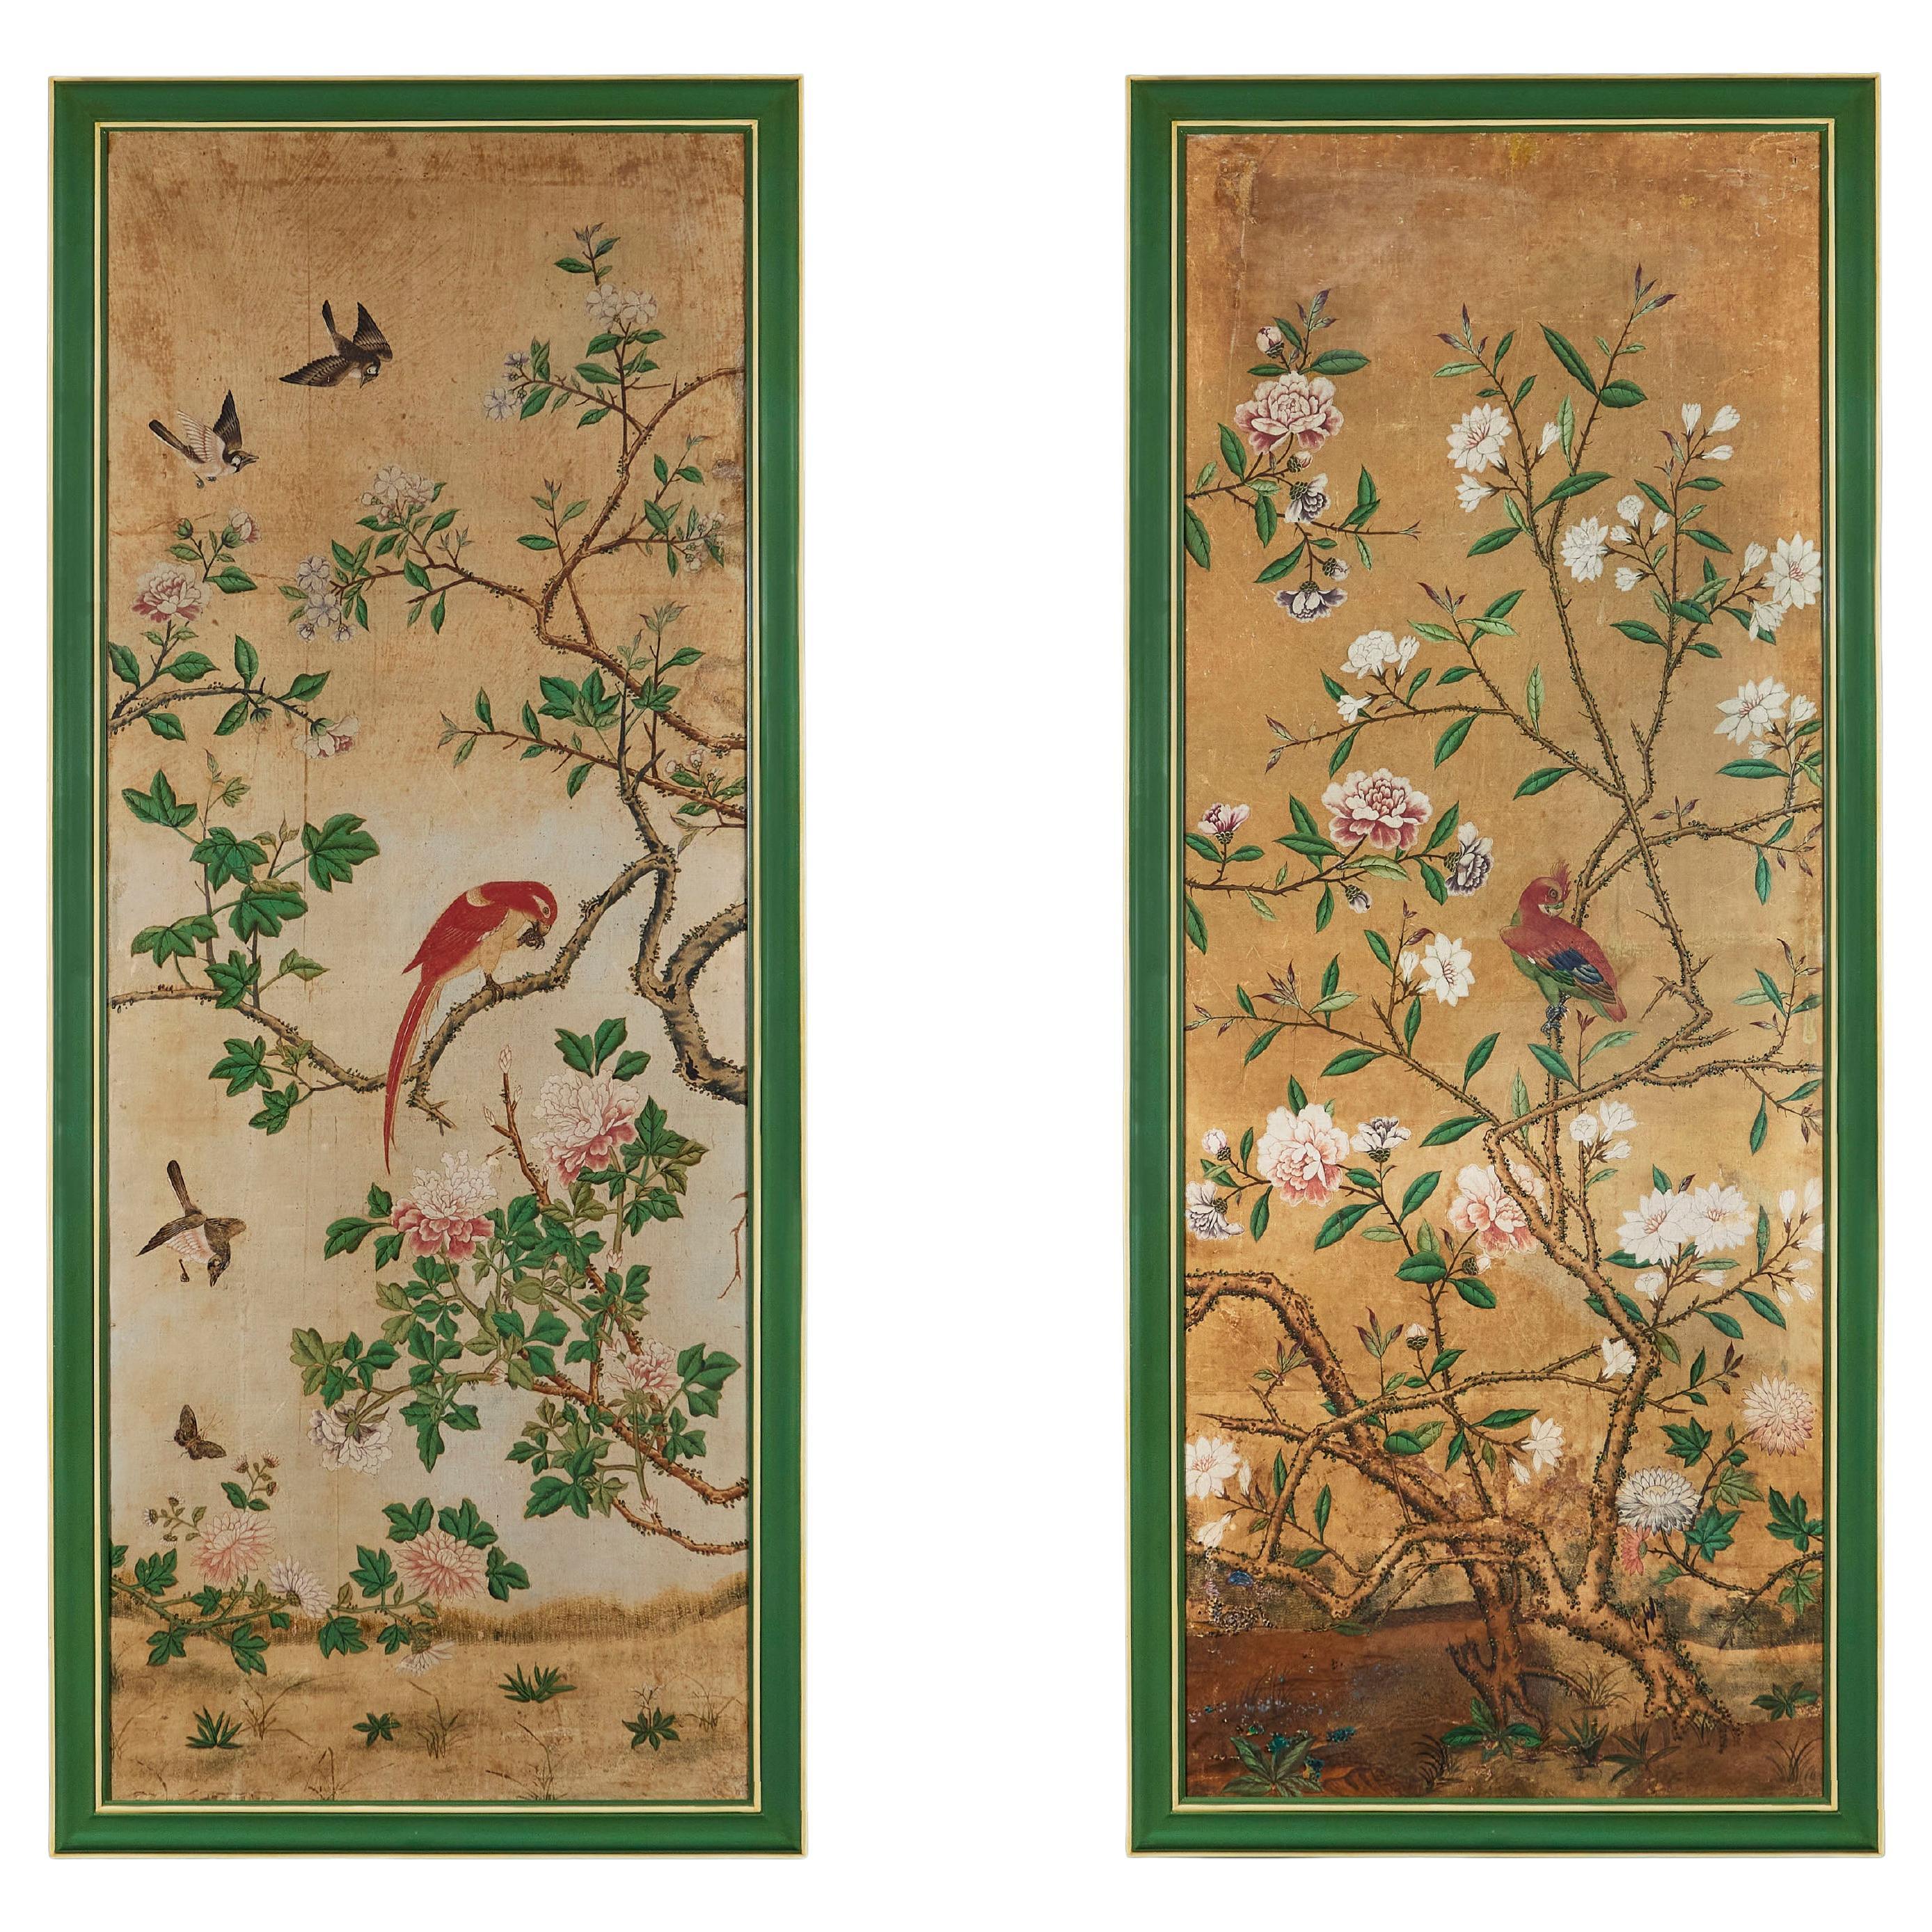 A Rare Pair of 18th Century Chinese Wallpaper Panels  For Sale